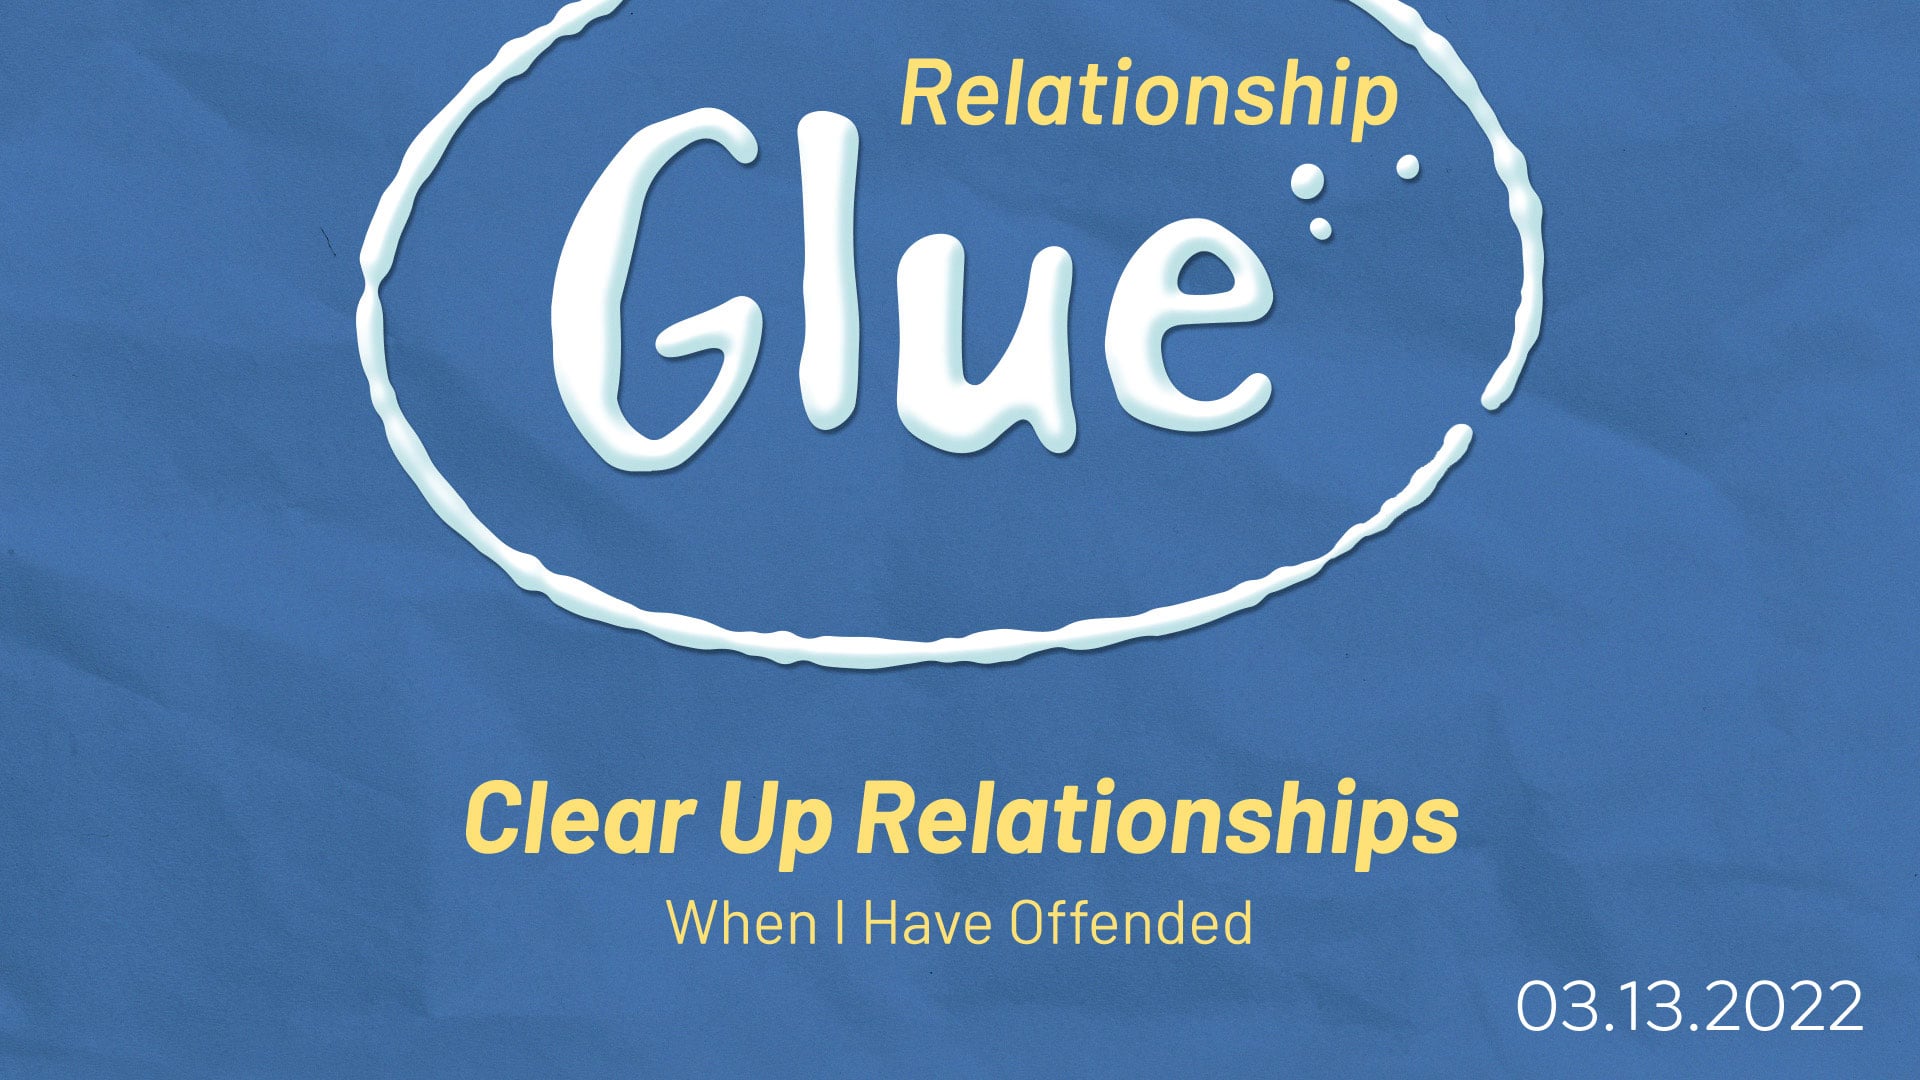 Relationship Glue - Part 6: Clear Up Relationships (When I Have Offended)